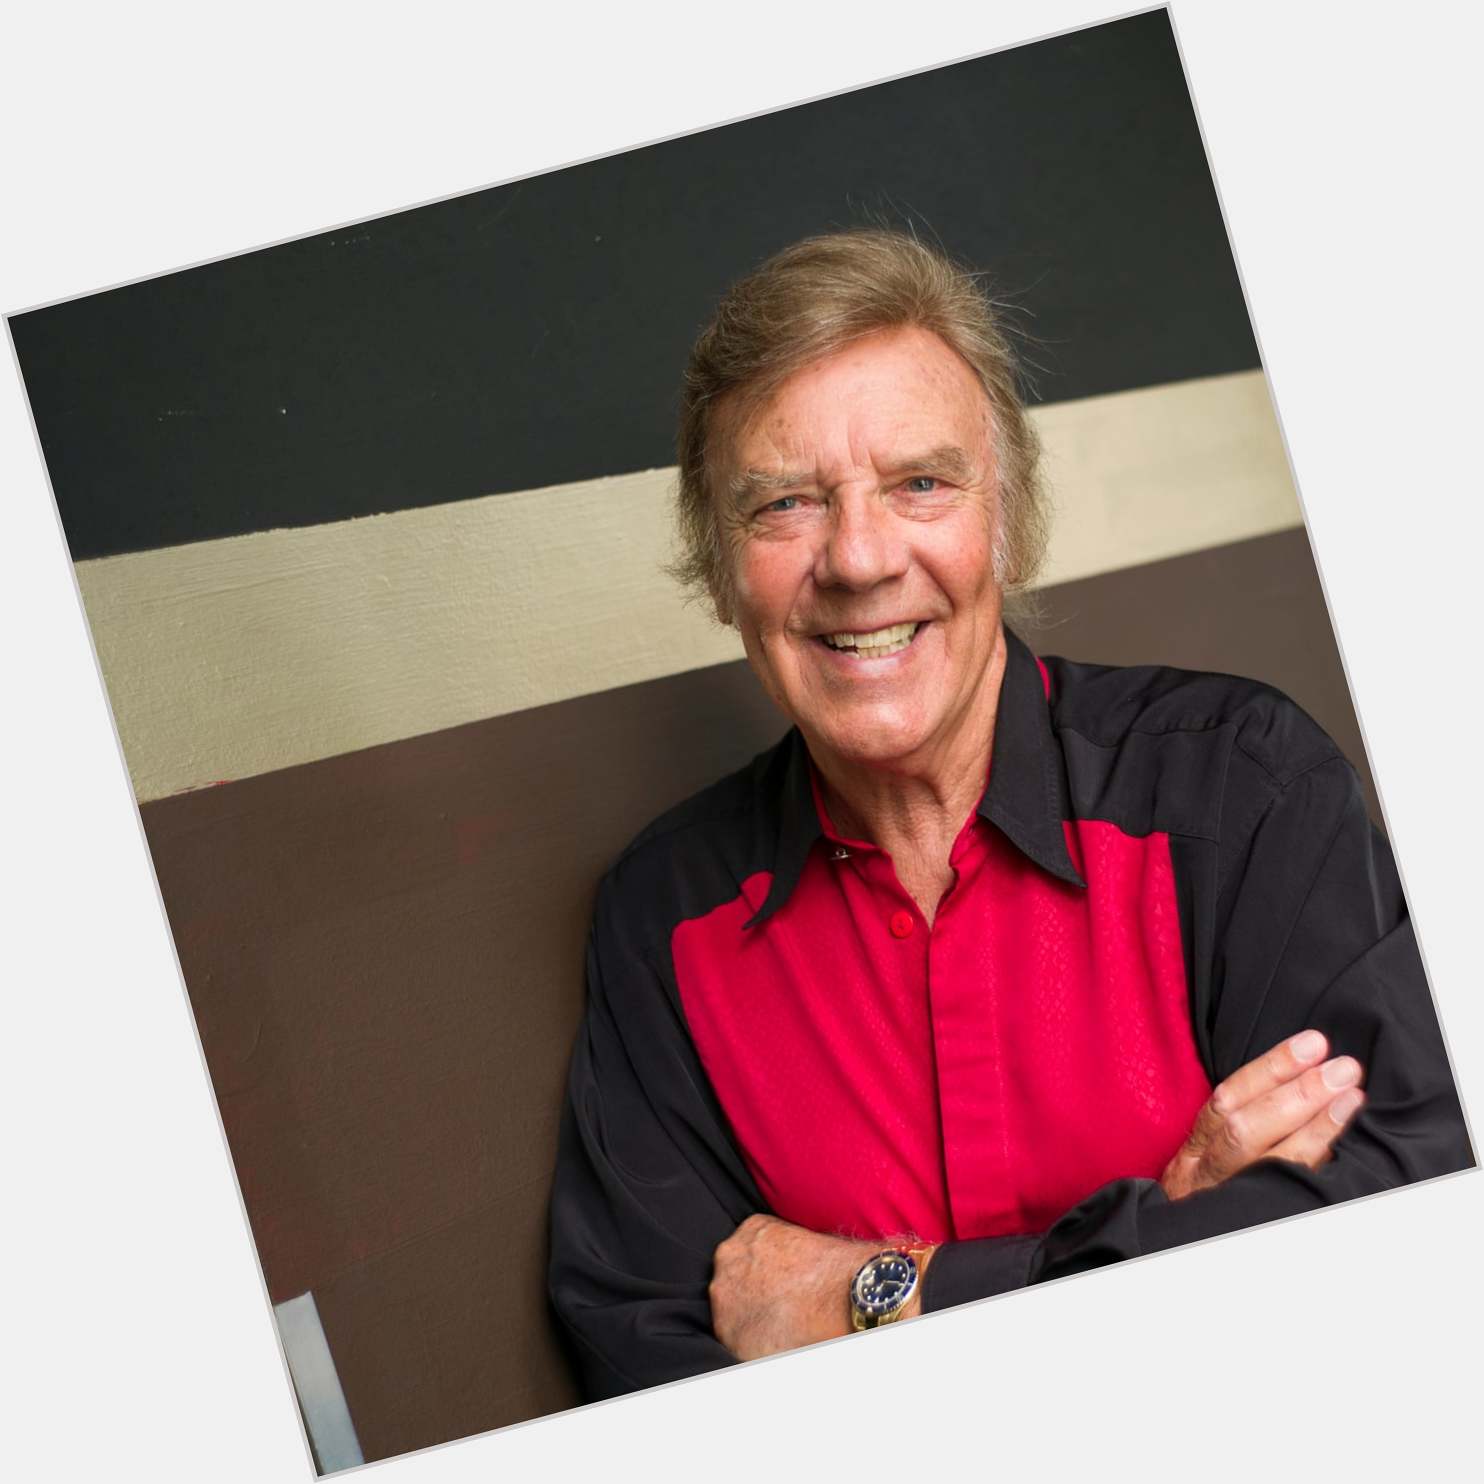 Please join me here at in wishing the one and only Marty Wilde a very Happy 82nd Birthday today  